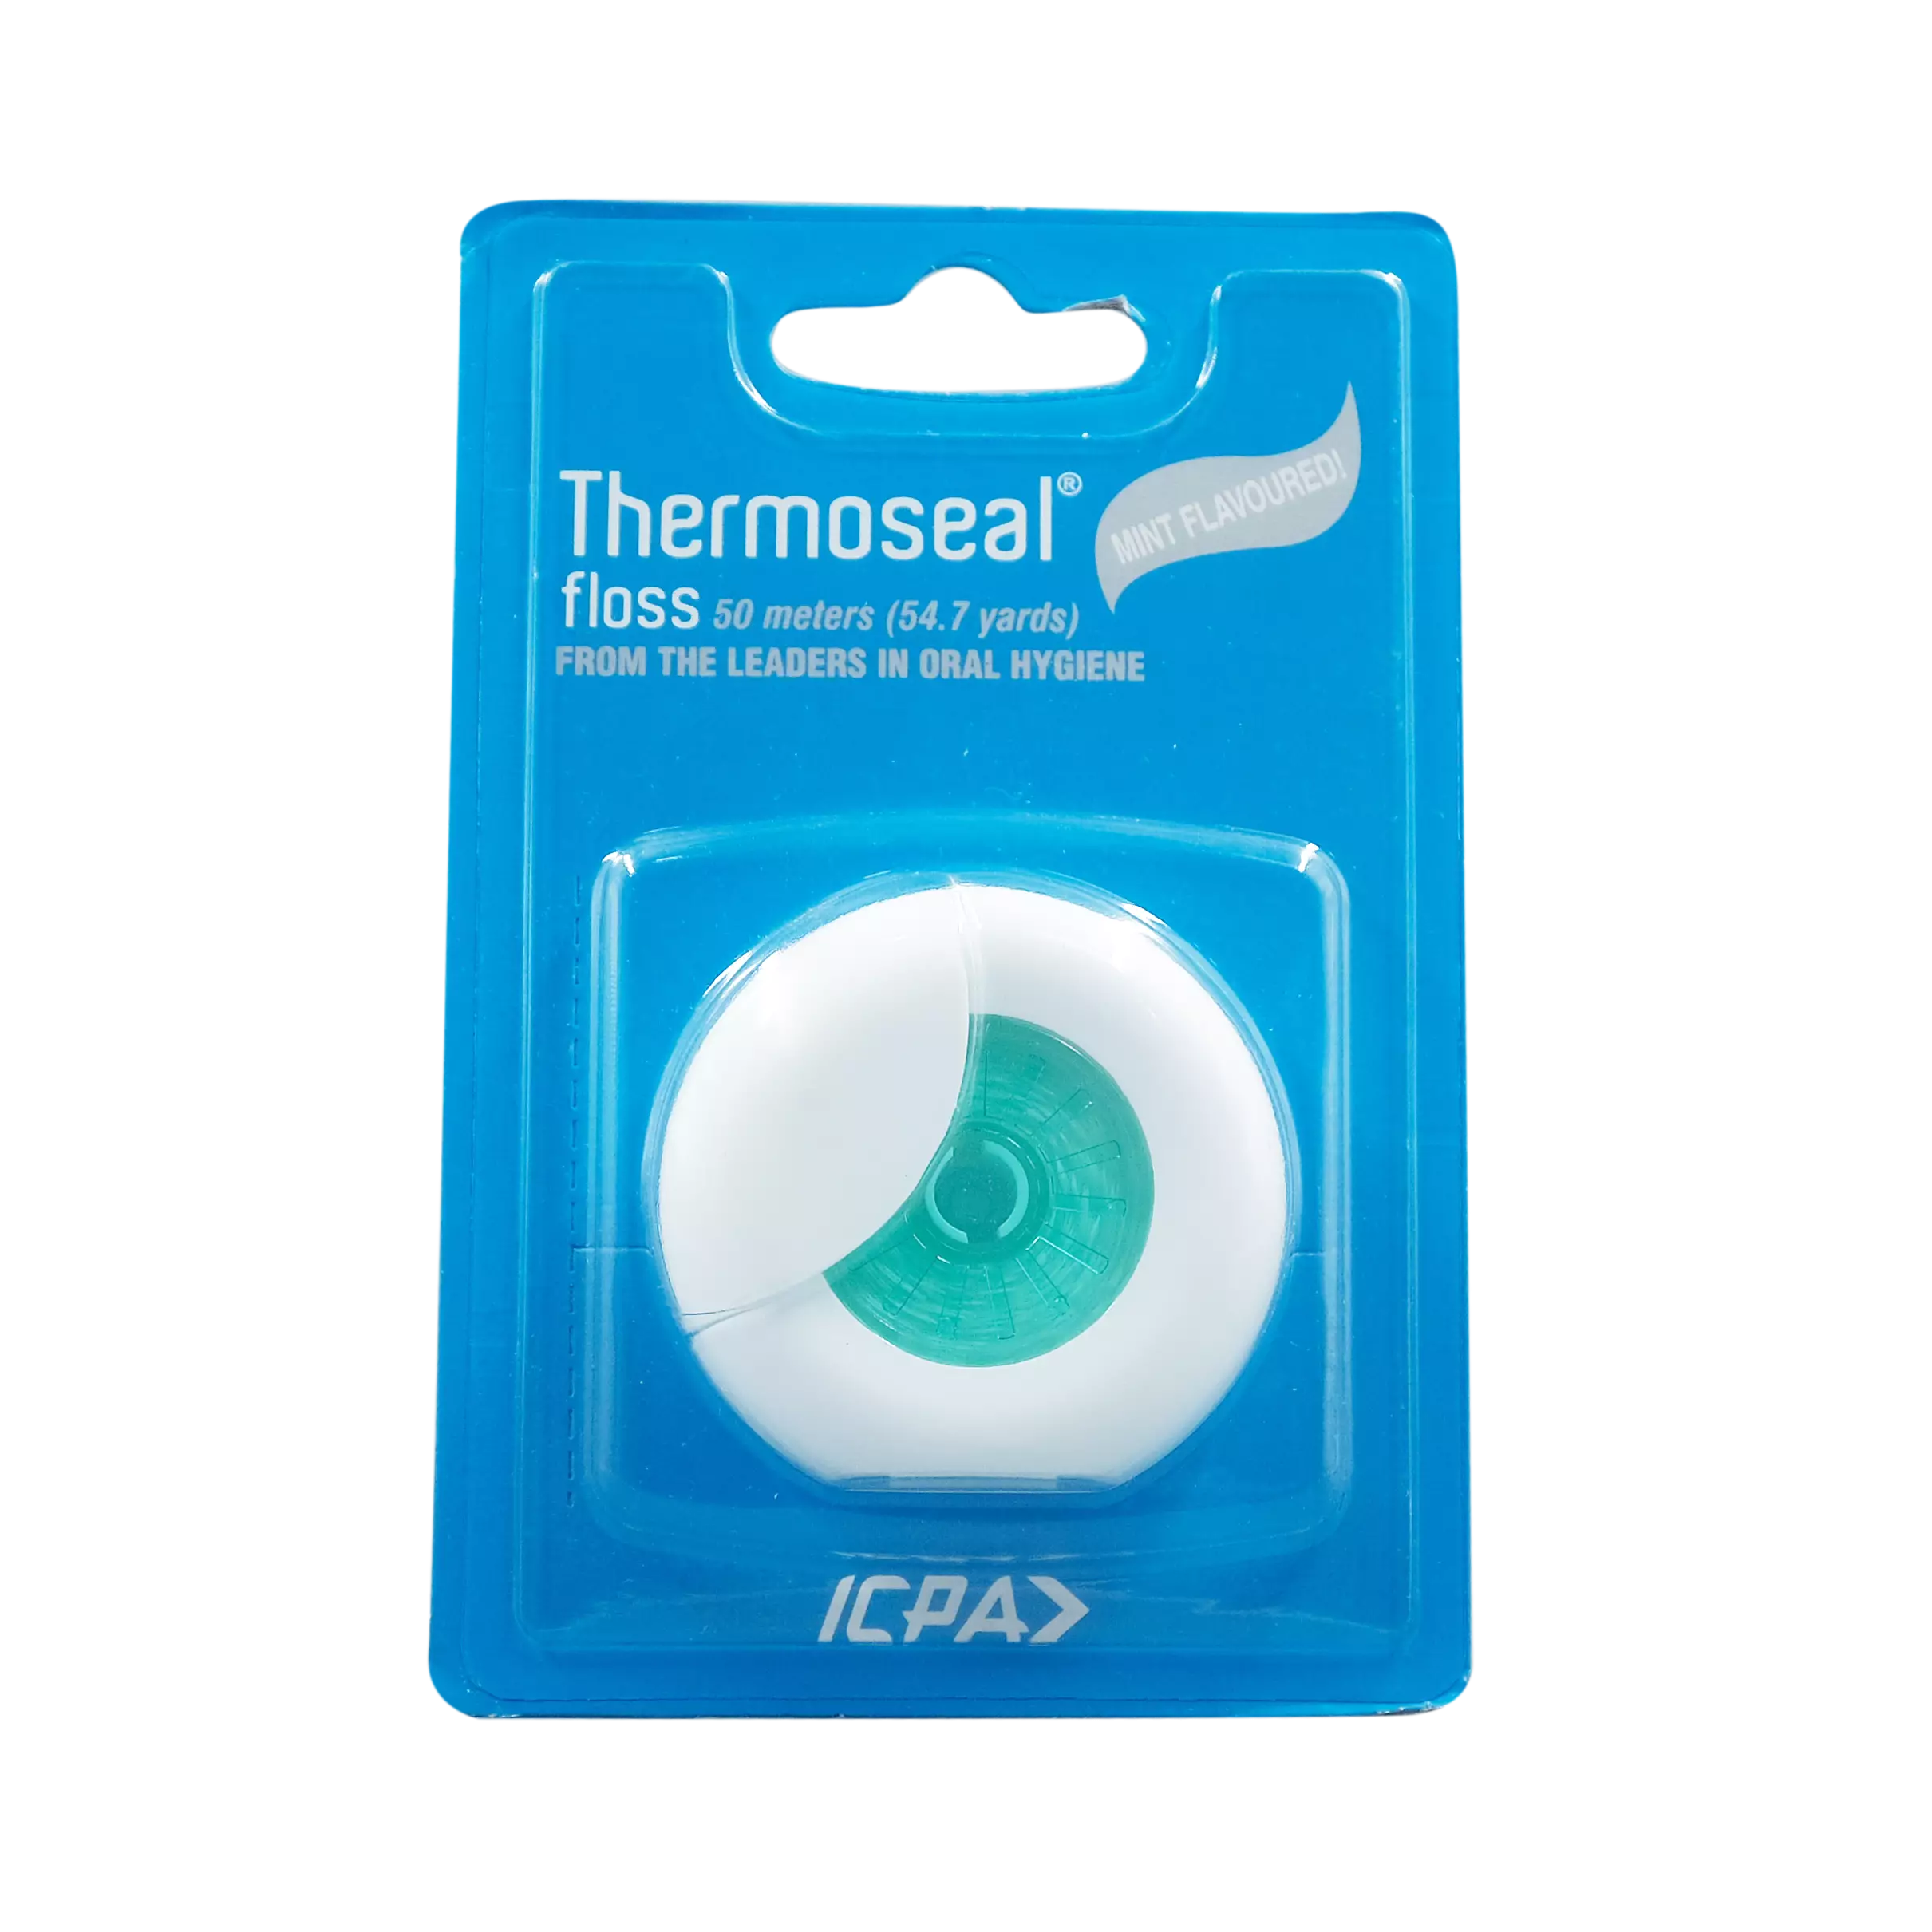 THERMOSEAL-FLOSS 1PC ##